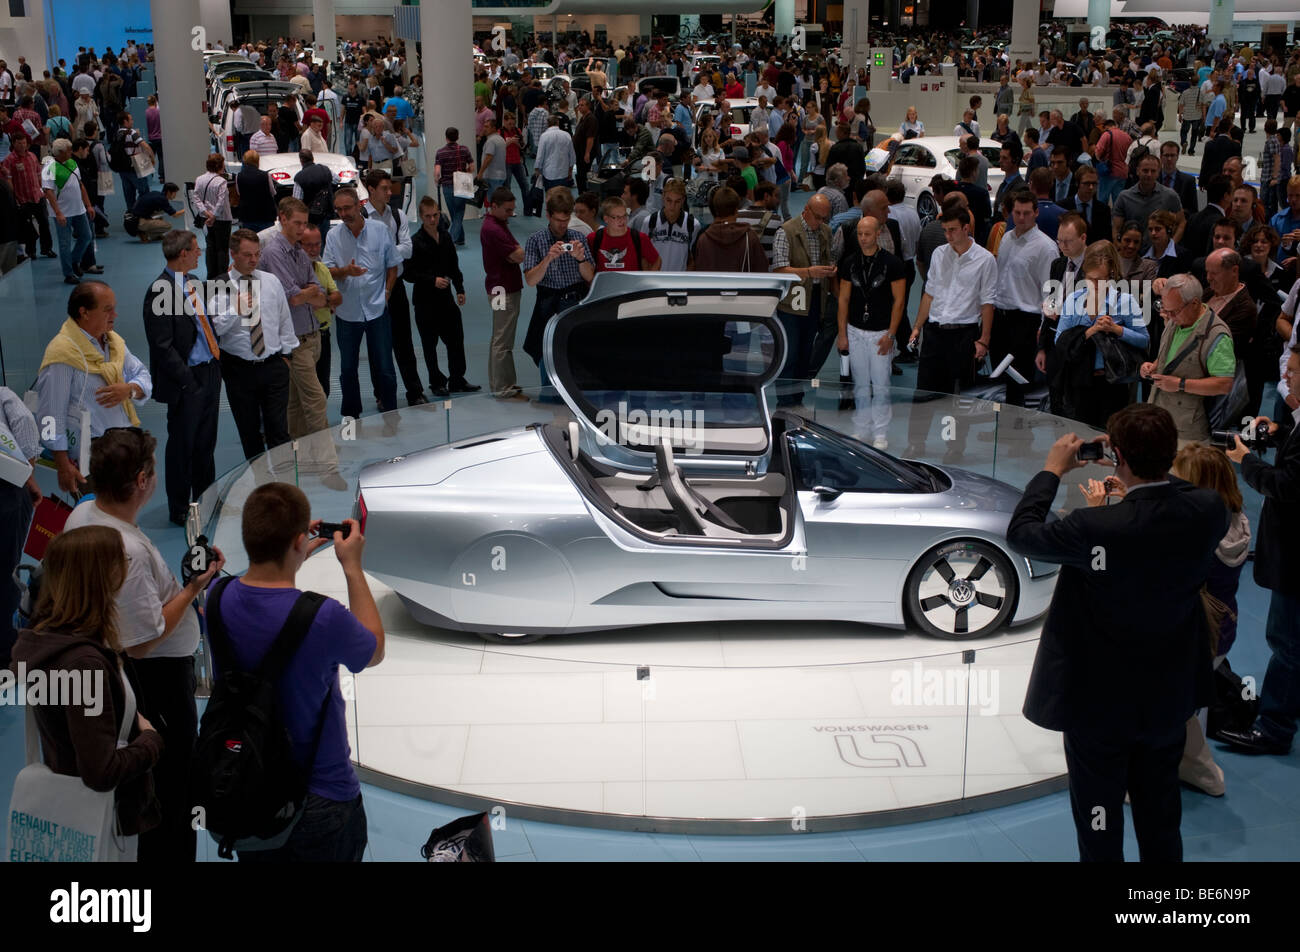 Volkswagen L1 ultra low fuel consumption concept vehicle on display at the Frankfurt Motor Show 2009 Stock Photo